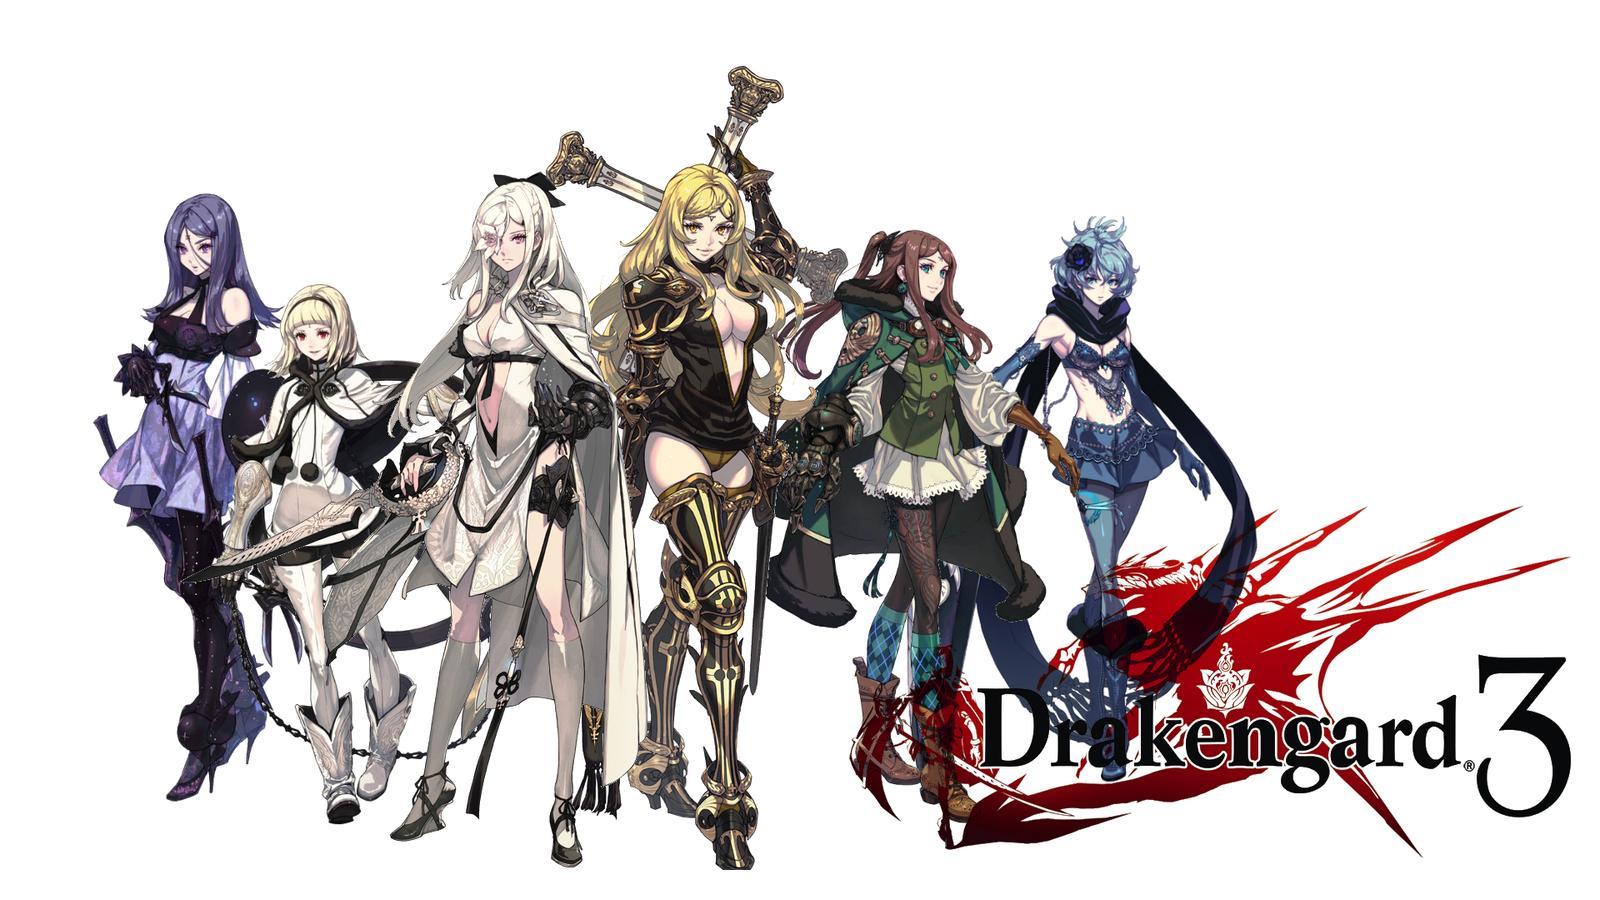 Drakengard 3 wallpaper most are [1920x1080] and feature Zero